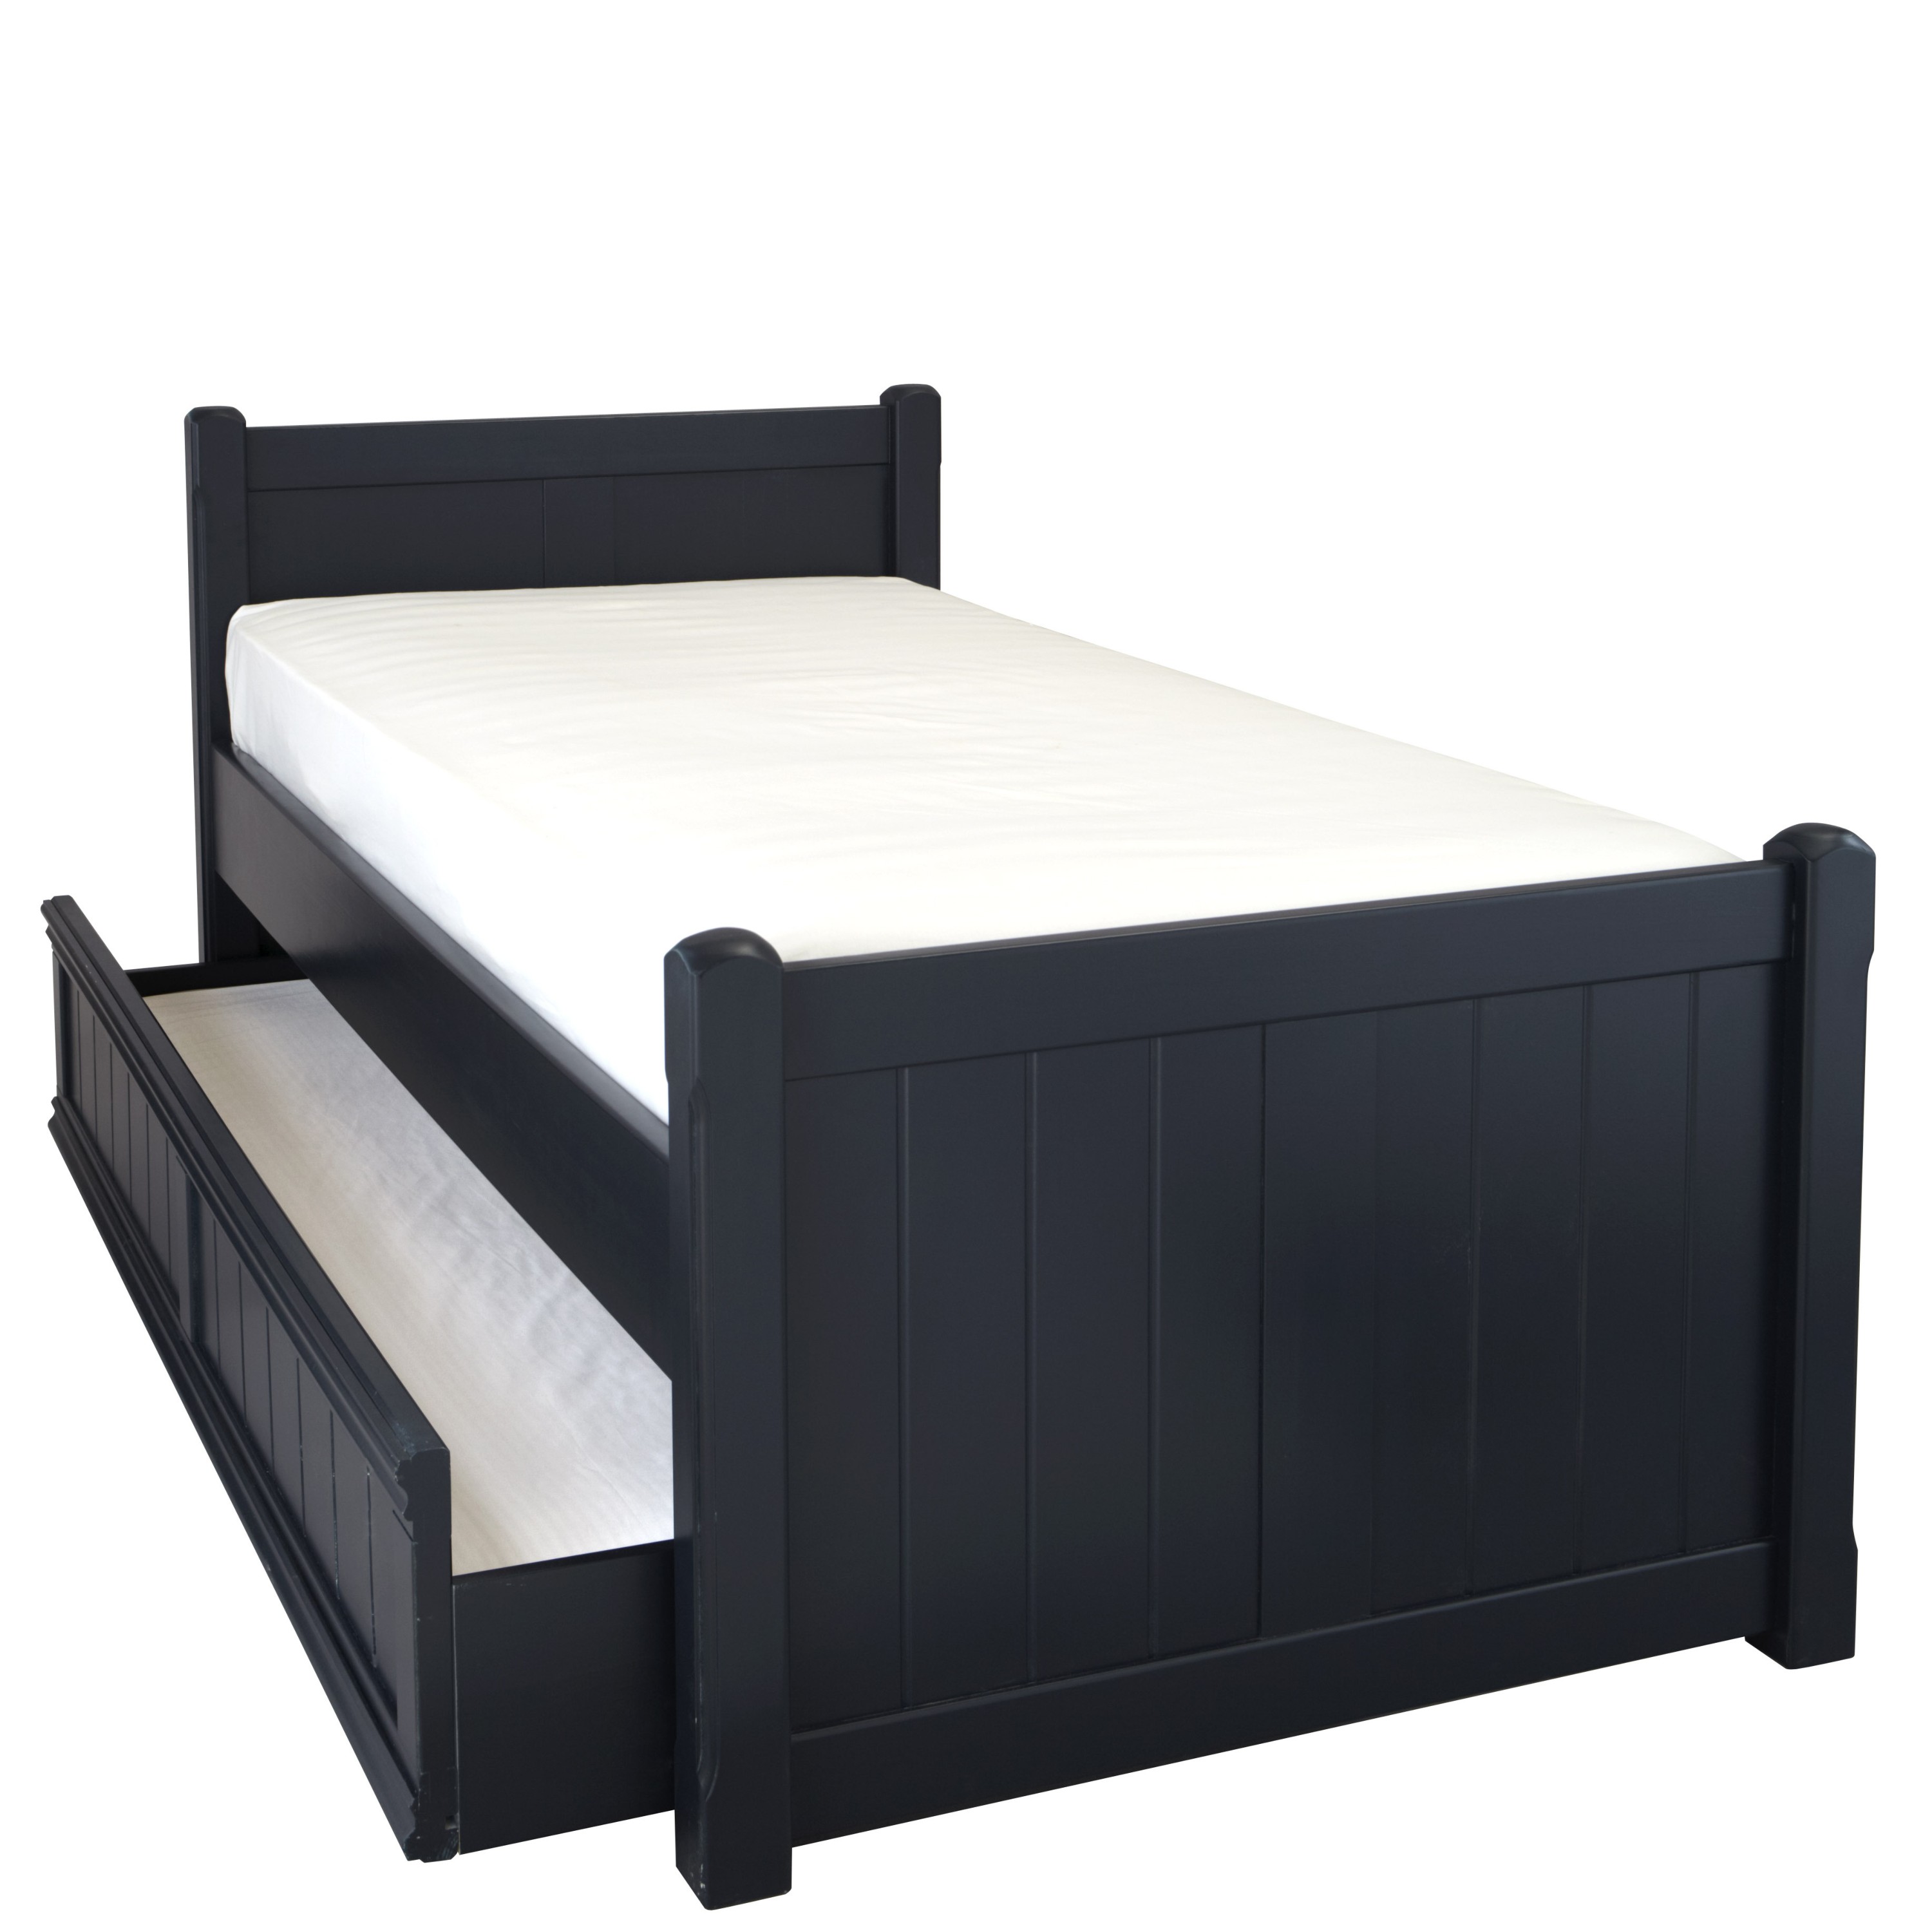 Charterhouse Children's Sleepover Bed With Drawers - Prussian Blue